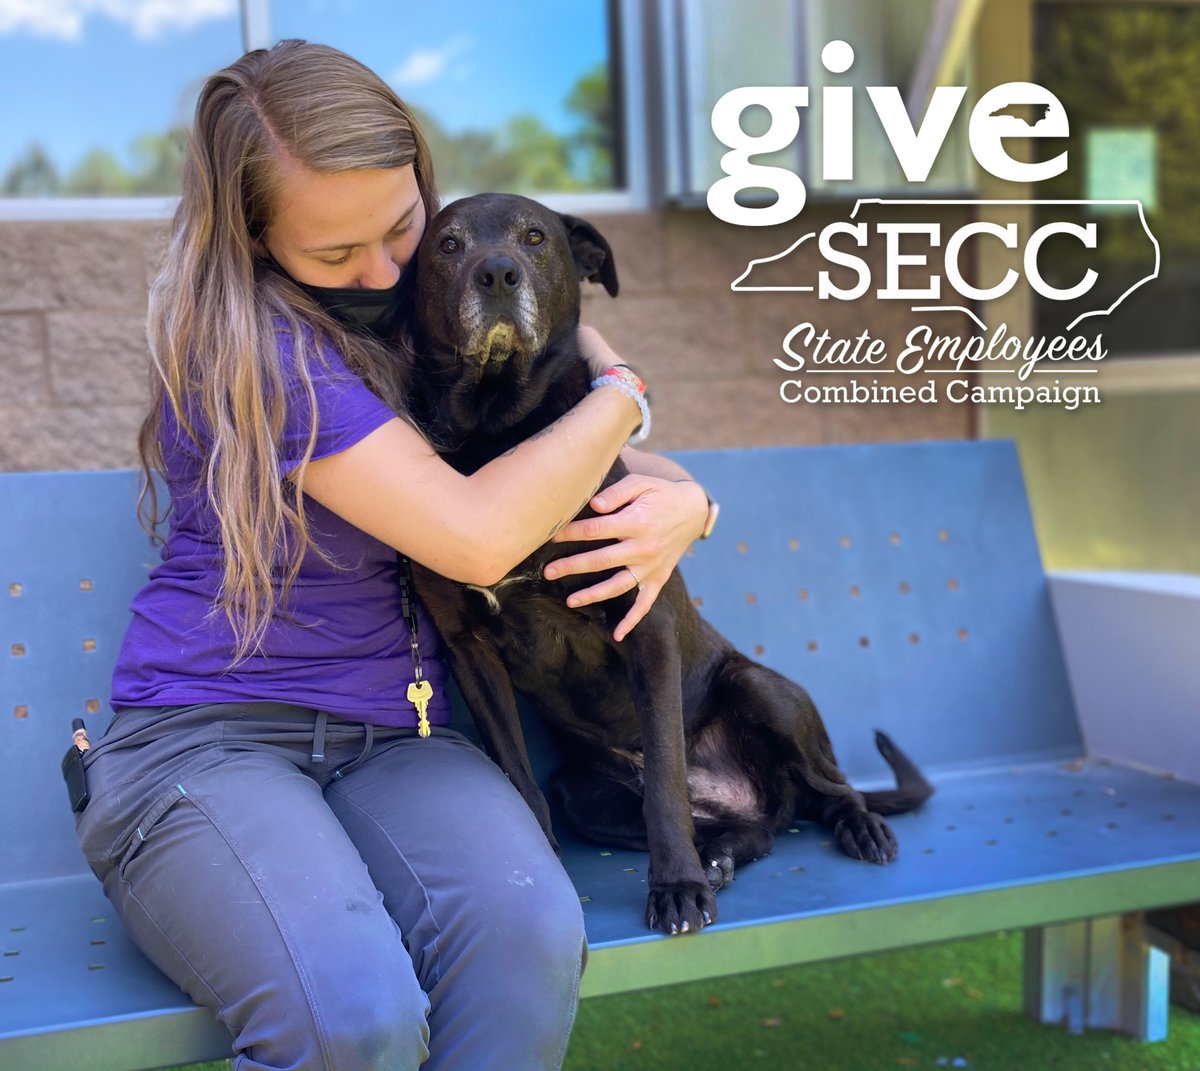 Calling all state employees! Please designate #SPCAWake through #SECC to help support local animal rescue 🐾 Learn more: spcawake.org/ways-to-give